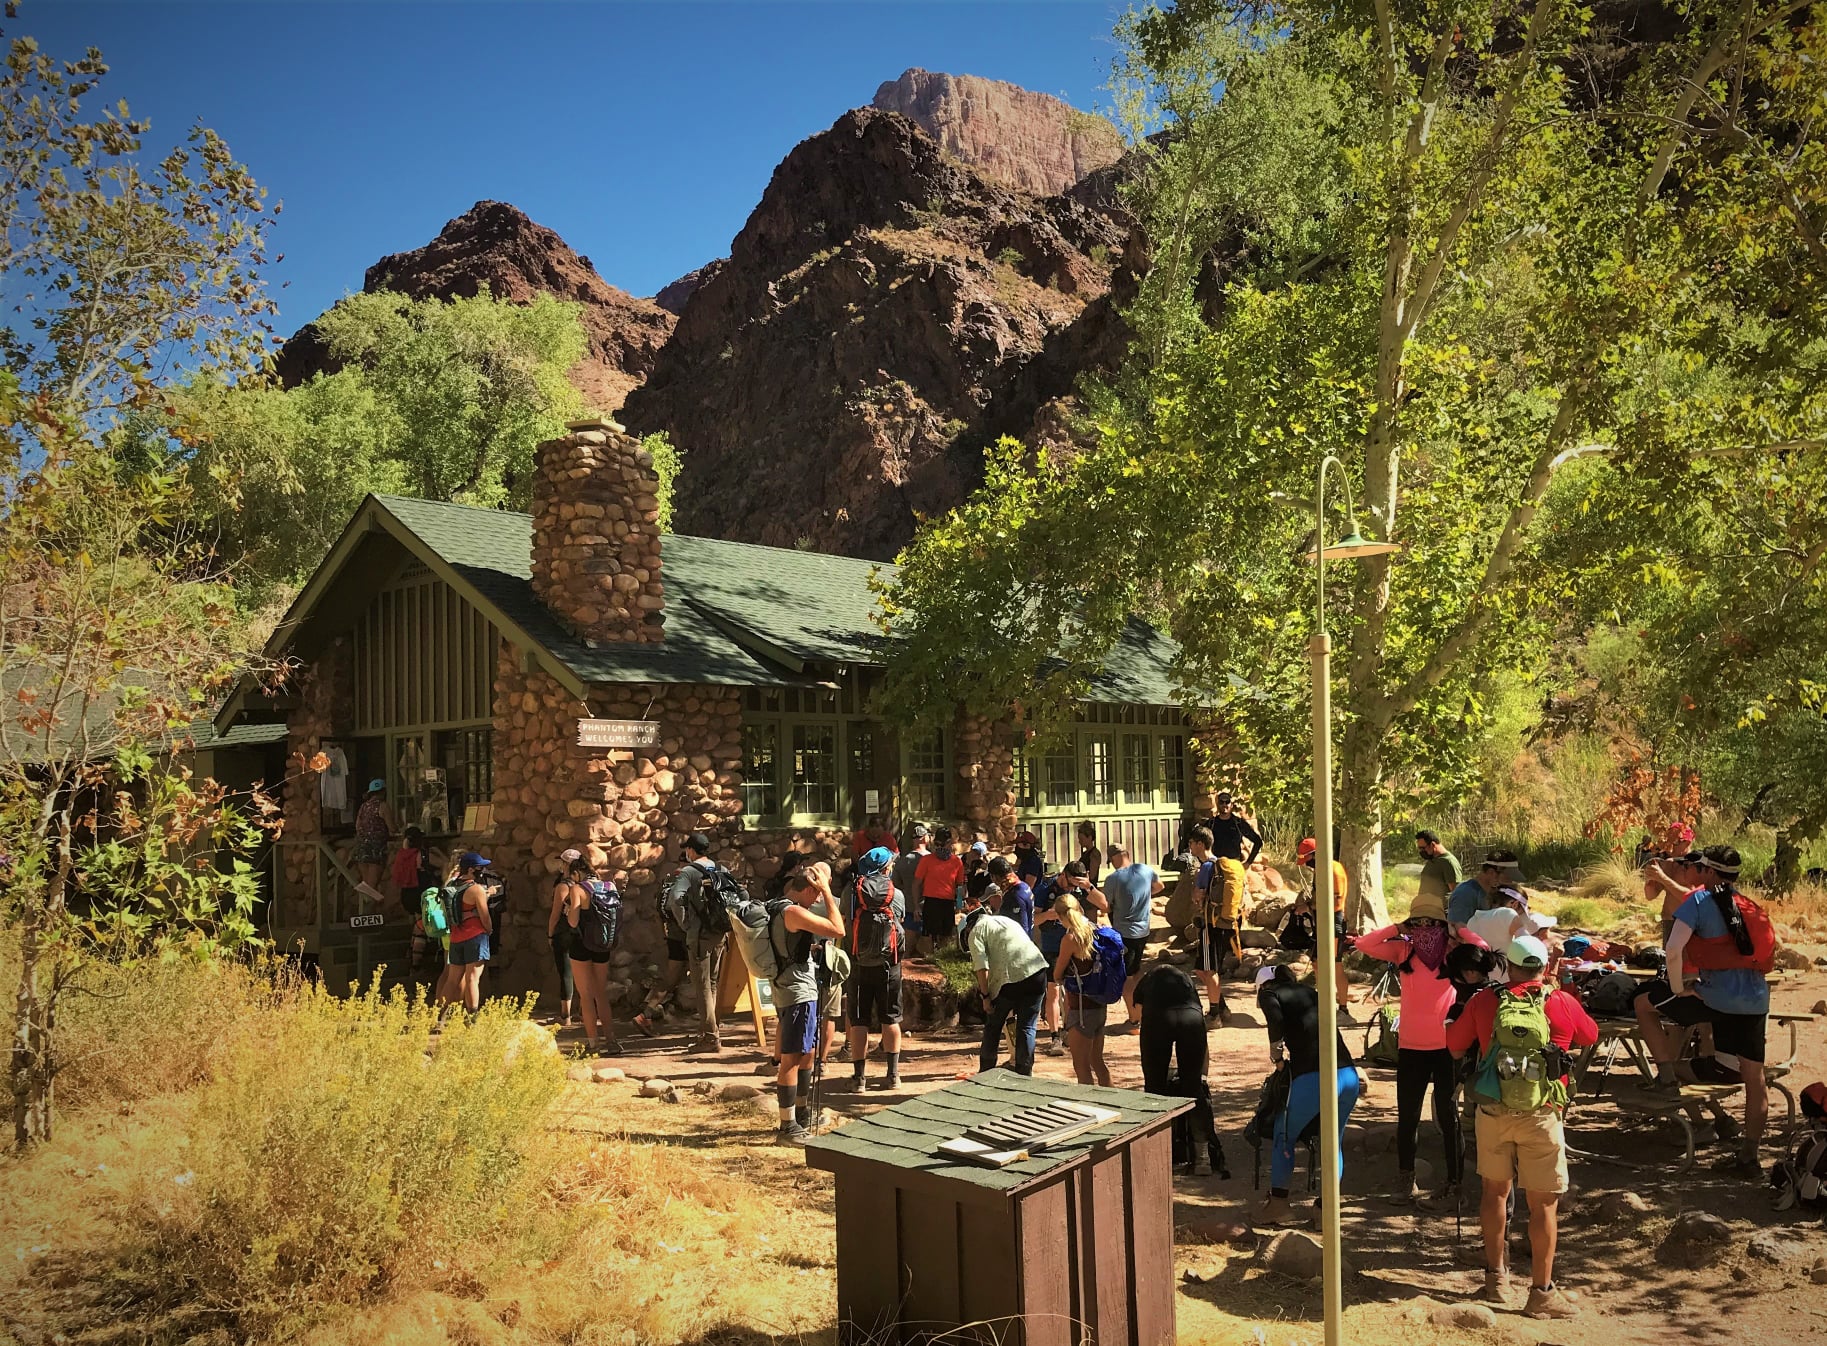 Many visitors gather around the Phantom Ranch canteen at the bottom of Grand Canyon